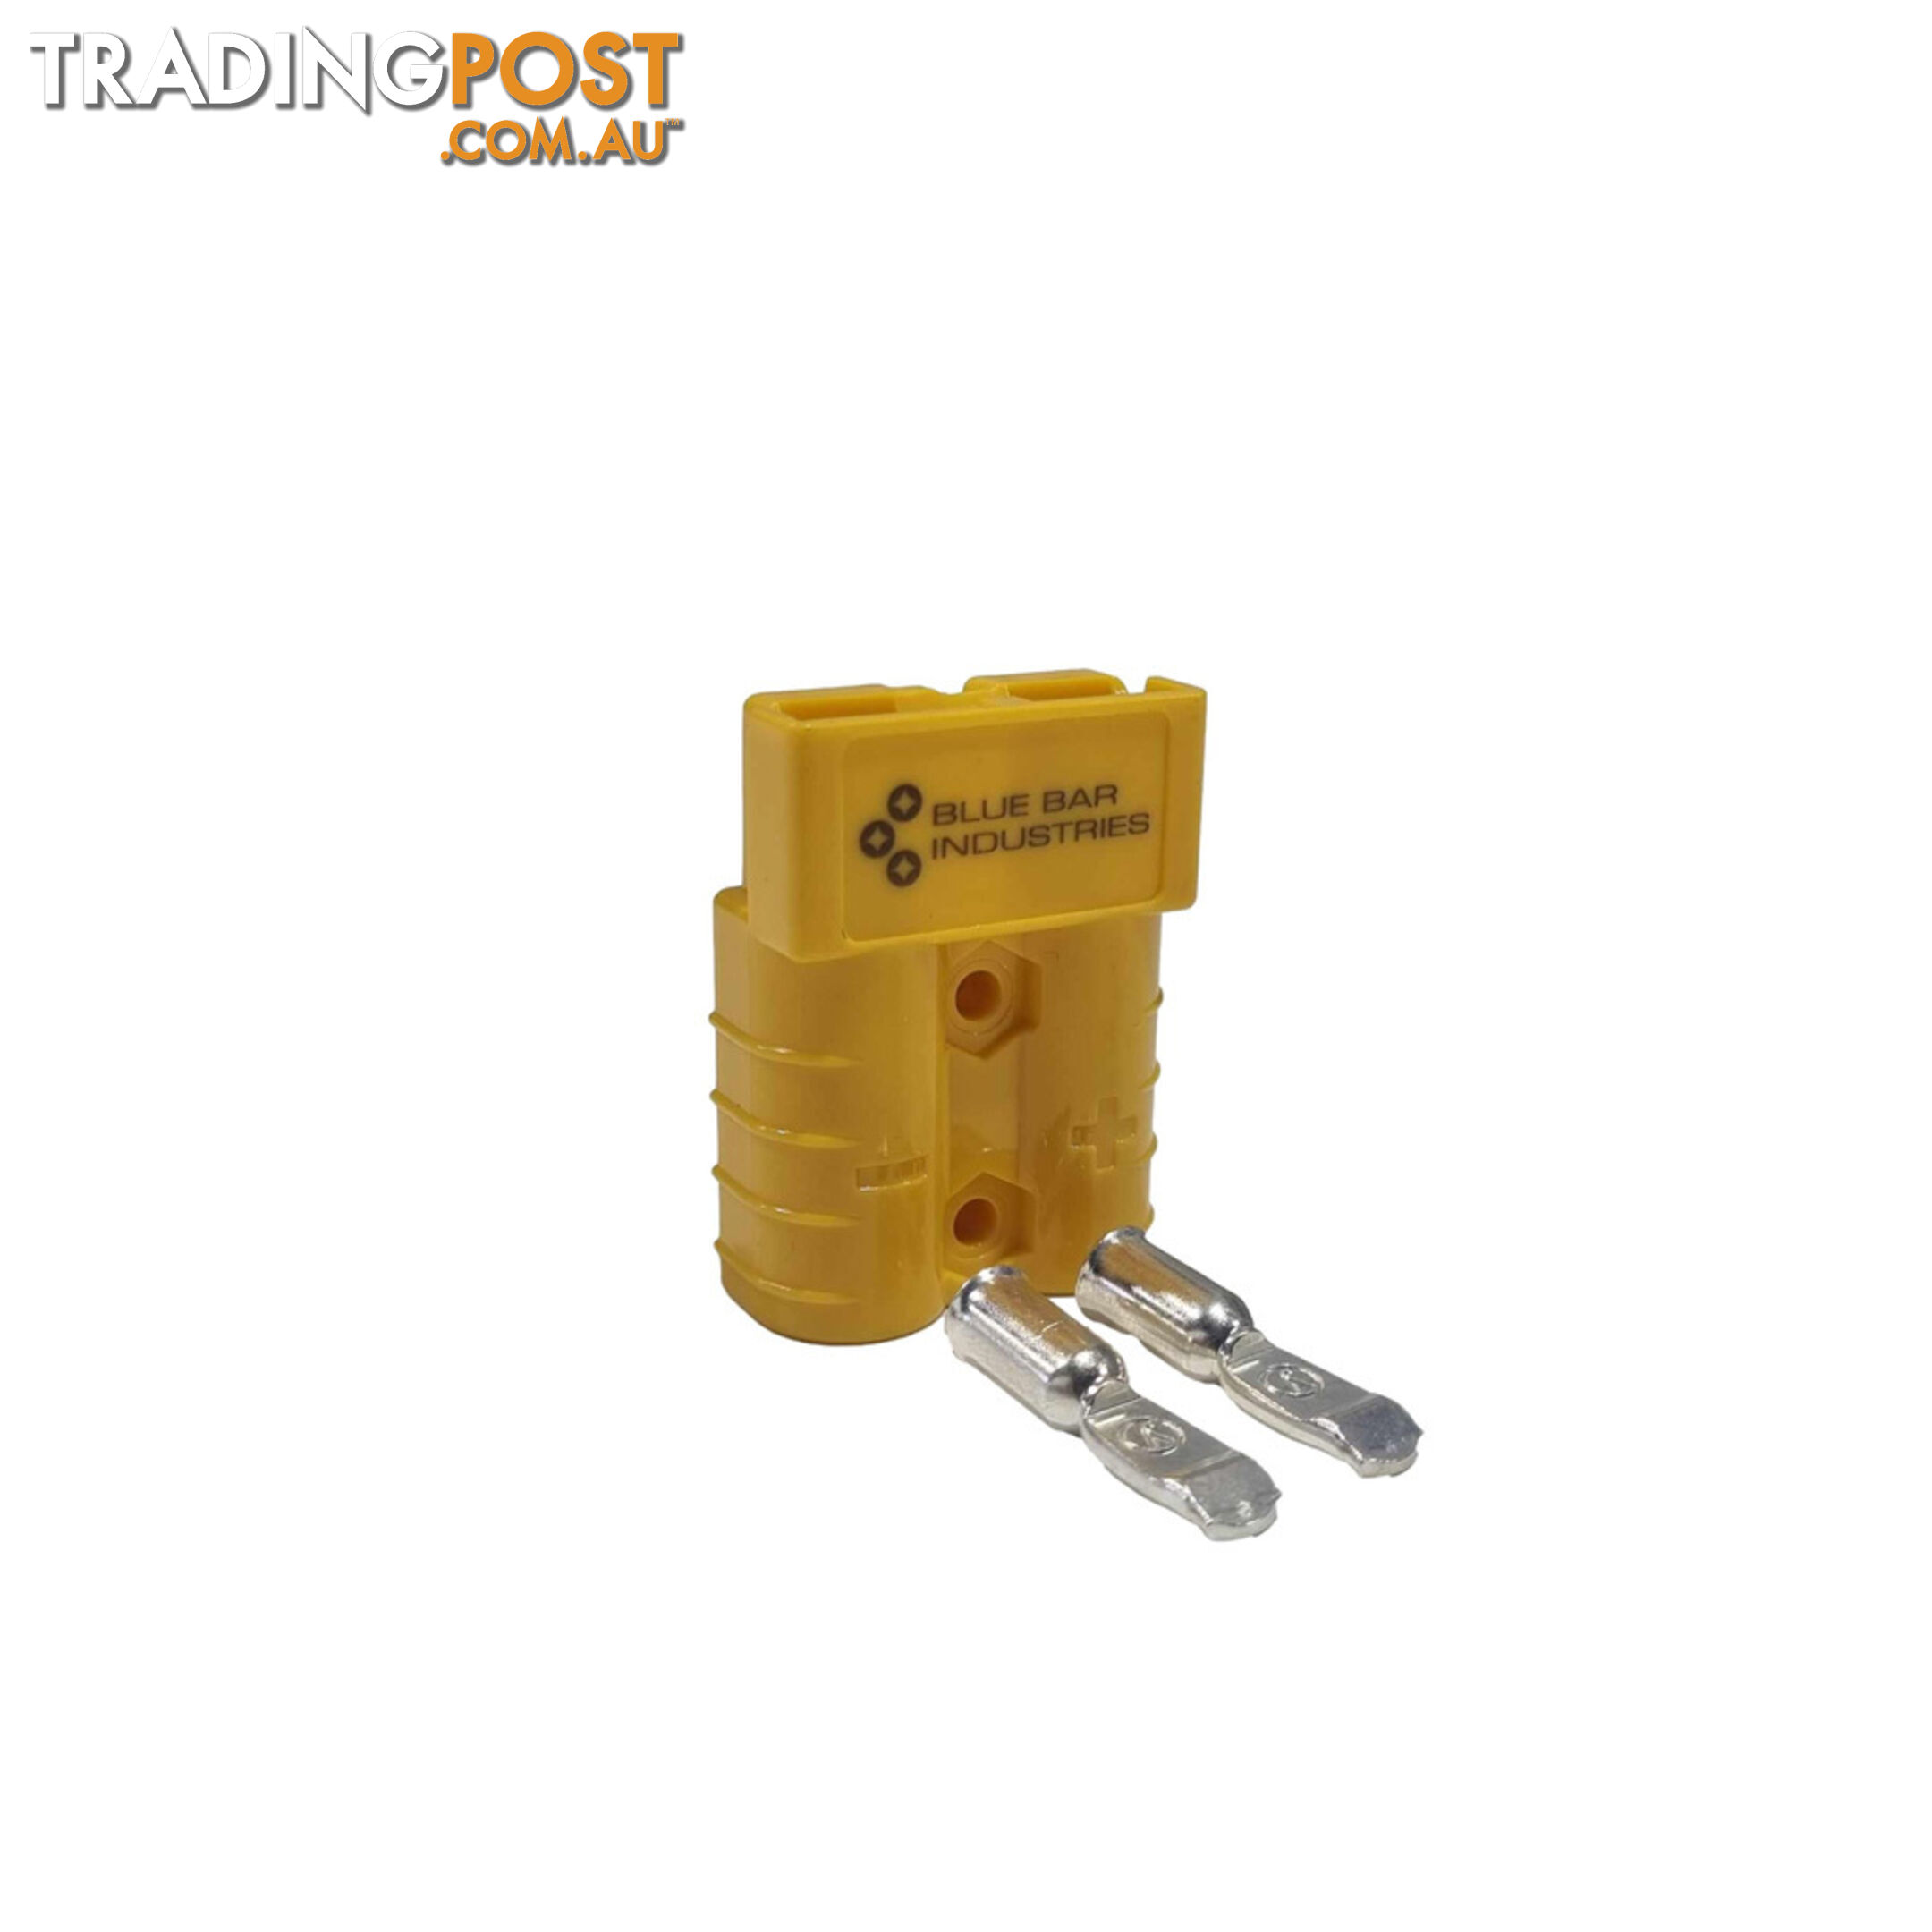 50 amp Anderson Style Plug Yellow with 6 awg Terminals